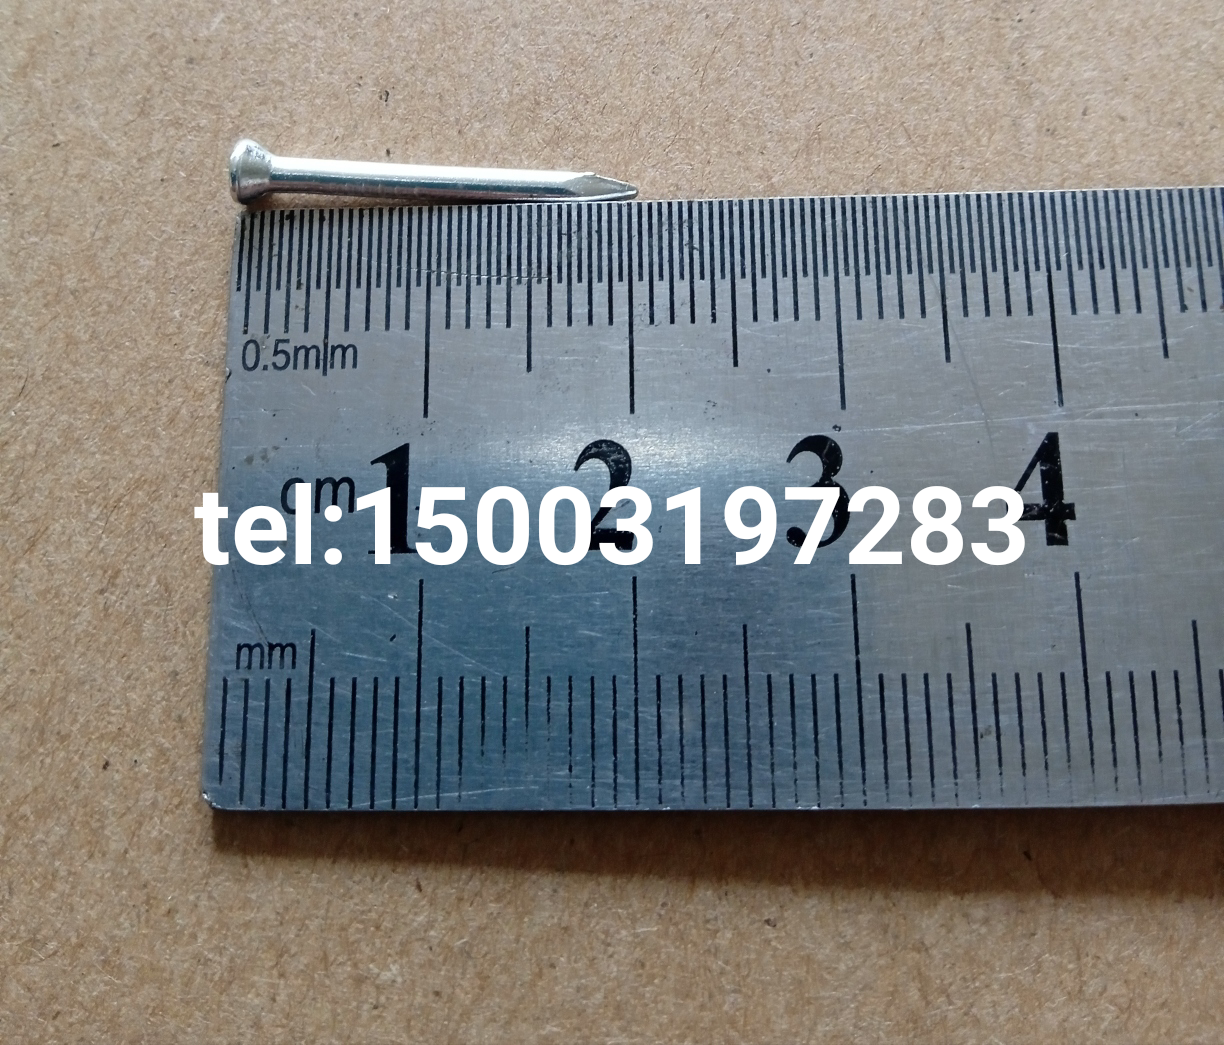 casing head concrete nail steel nail galvanised nail cable clip nail plastic clip nail small concrete nail